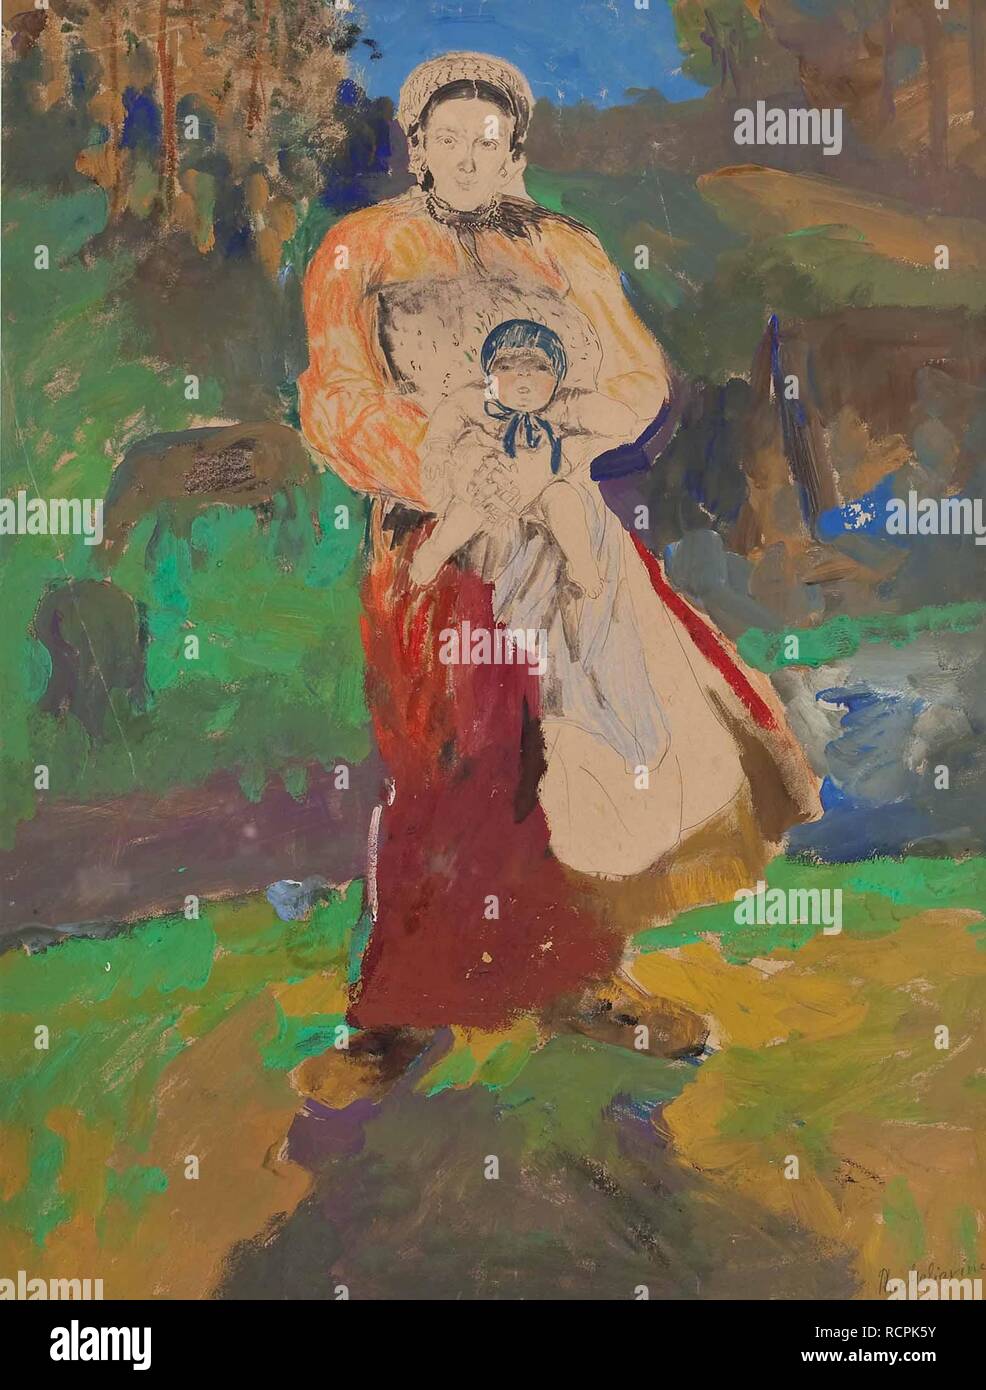 Mother and Child in Landscape. Museum: PRIVATE COLLECTION. Author: Malyavin, Filipp Andreyevich. Stock Photo